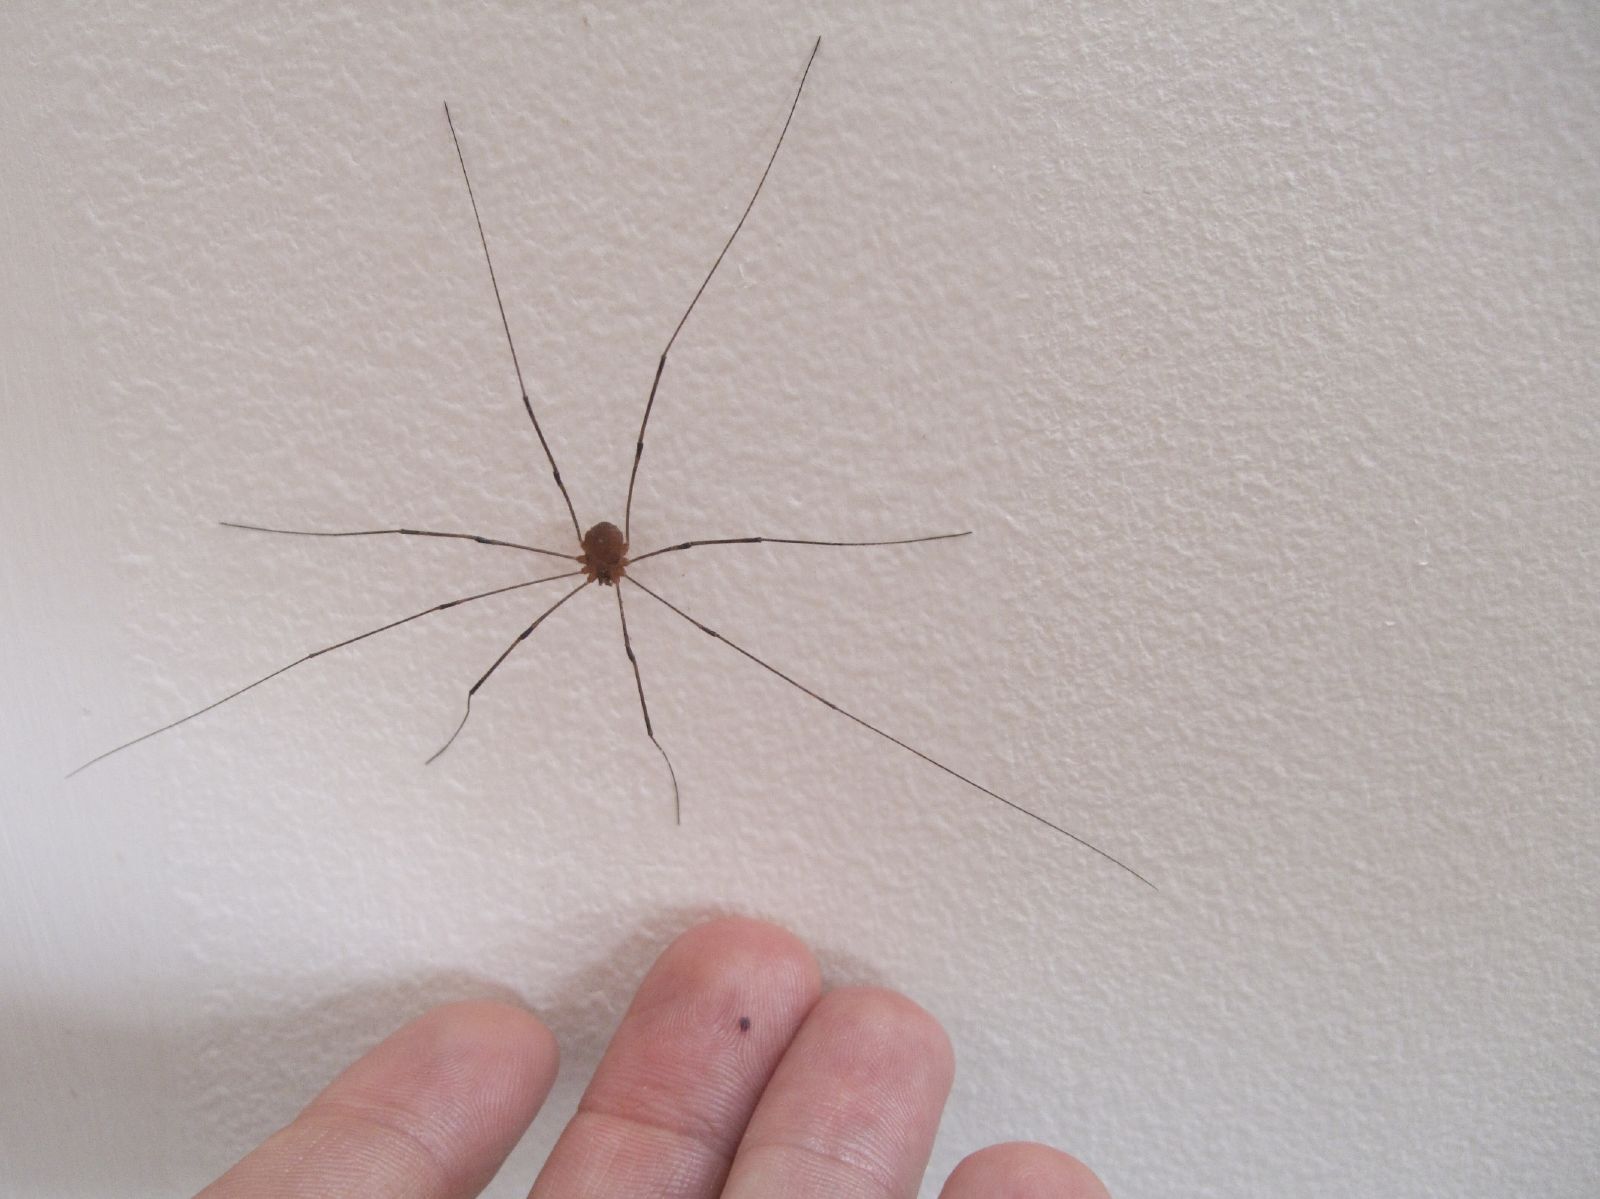 a hand is pointing at a spider on the wall